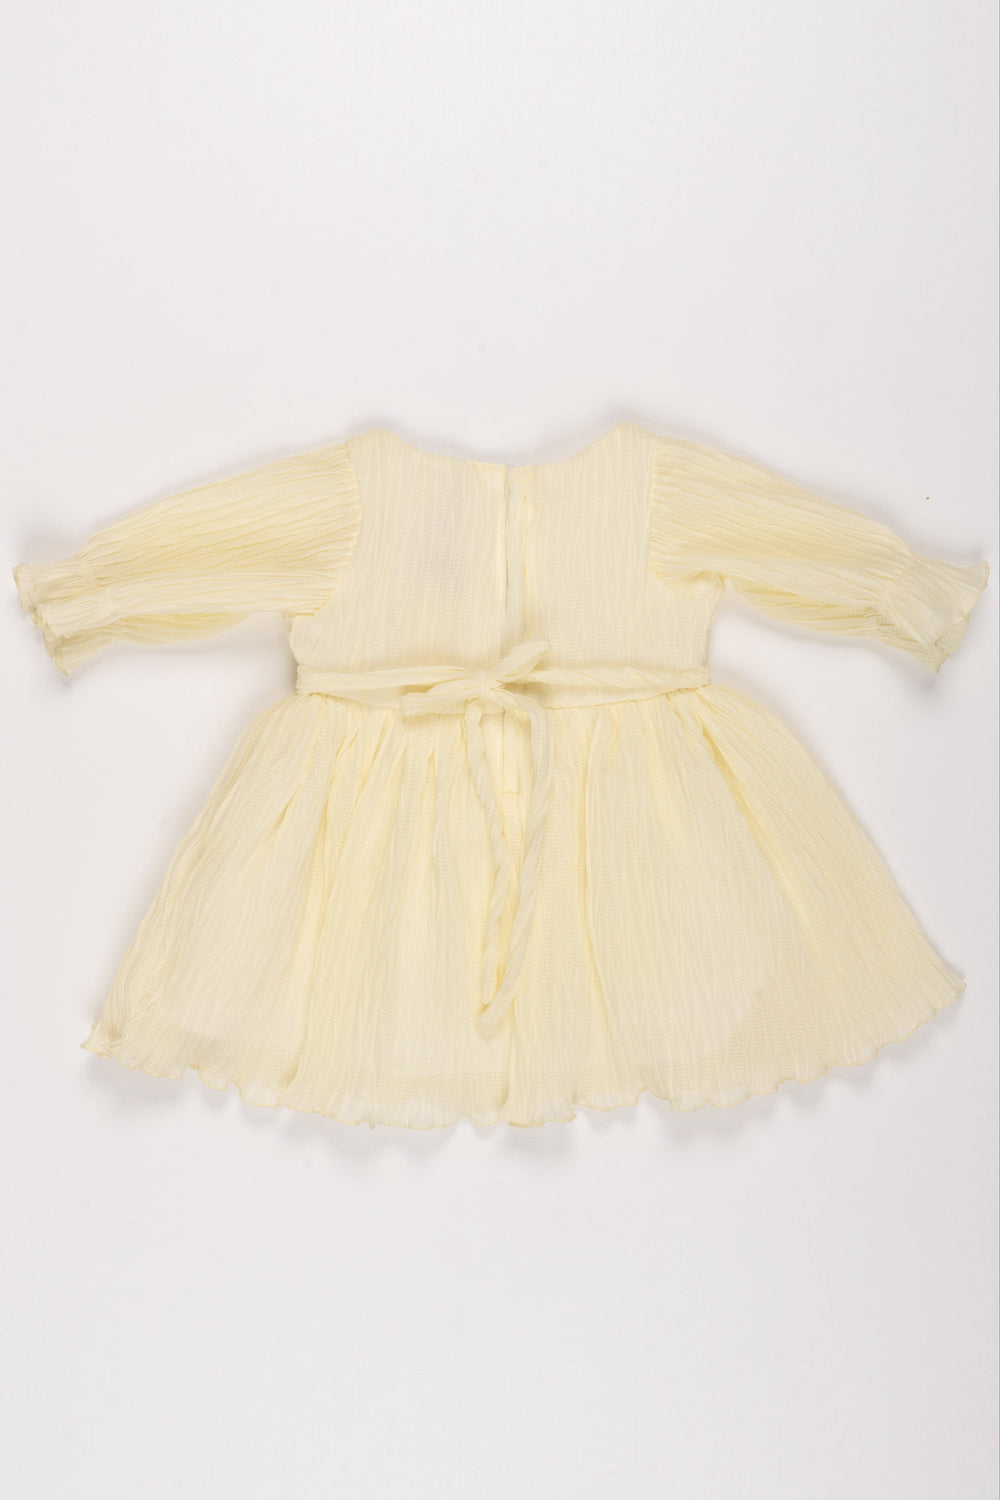 The Nesavu Baby Fancy Frock Girls Elegant Cream Pleated Tulle Dress with Floral Accent - Perfect for Special Occasions Nesavu Girls' Cream Tulle Dress | Elegant Pleated Formal Baby Frocks | The Nesavu